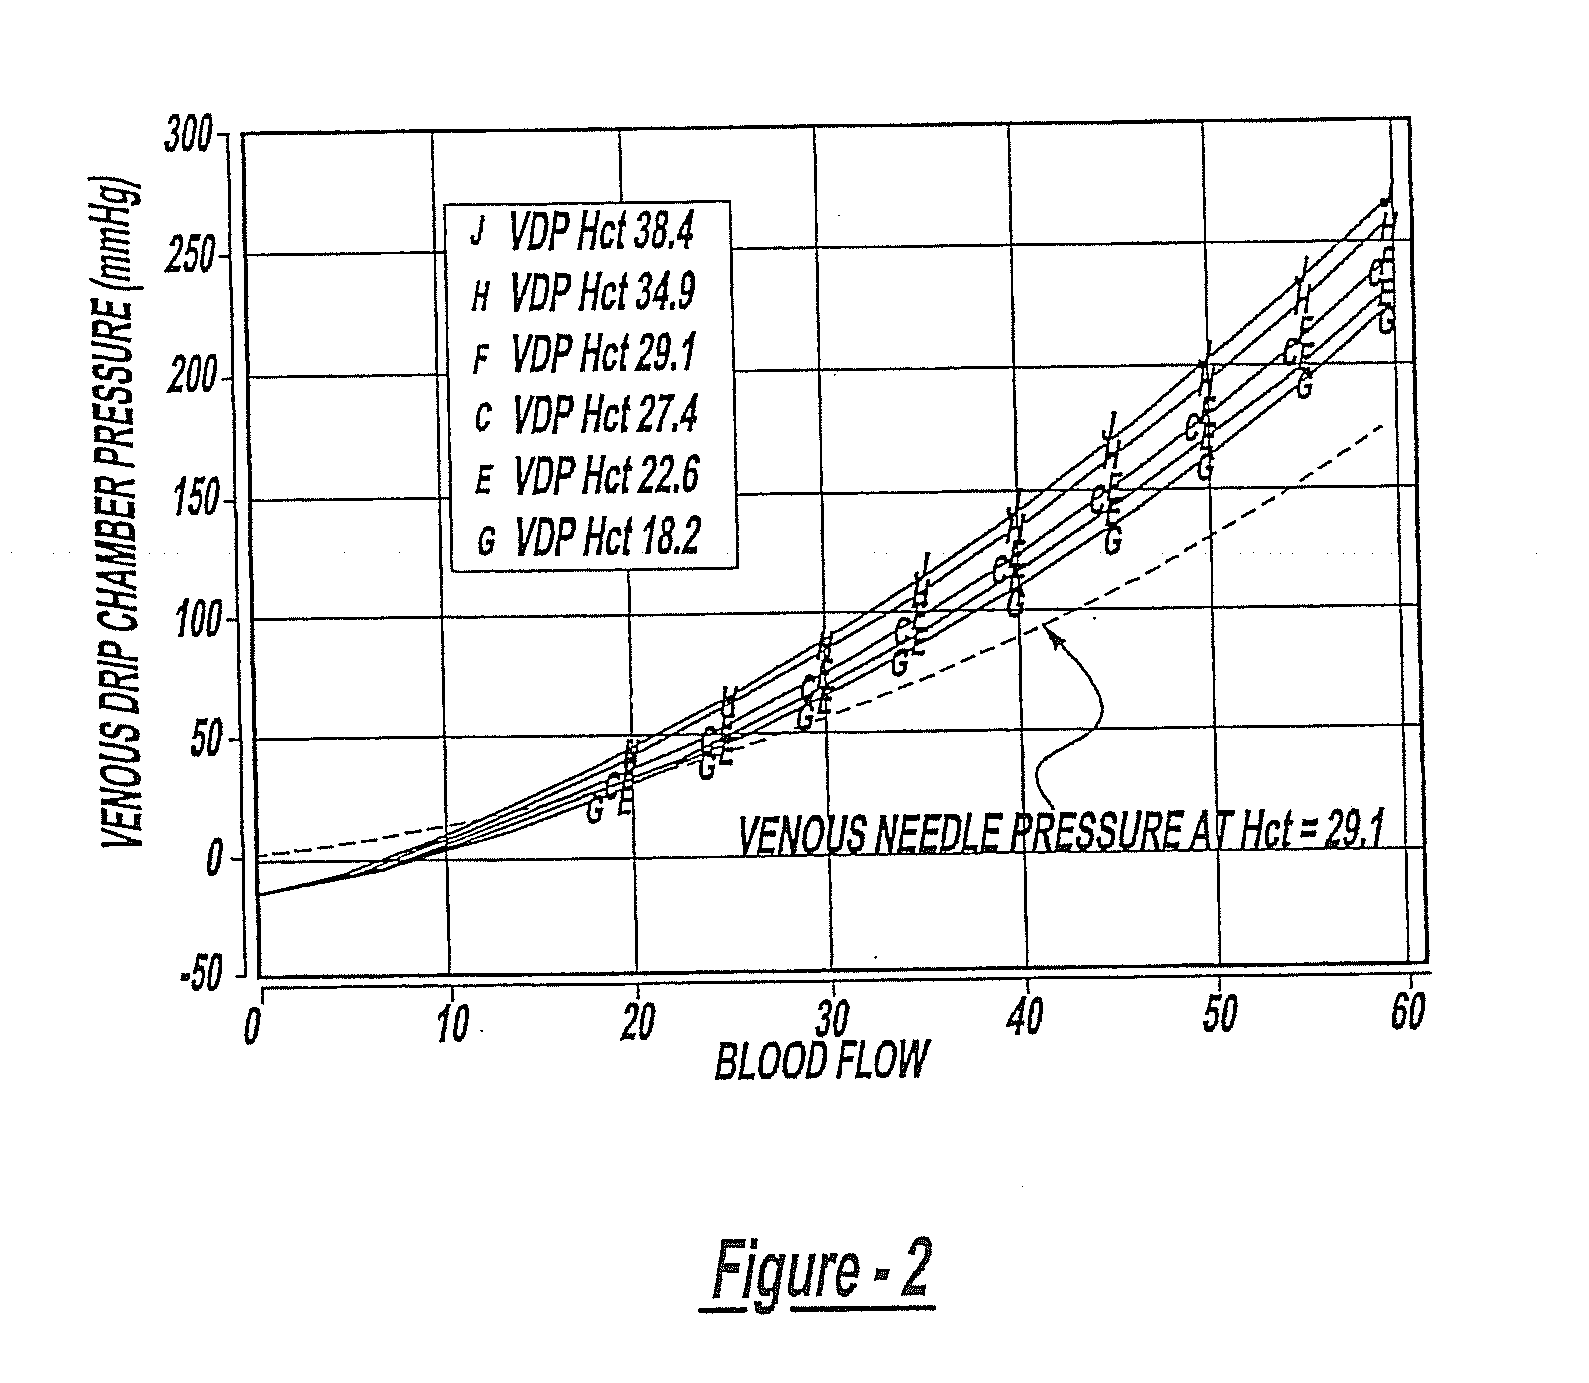 Method of Monitoring Dislodgement of Venous Needles in Dialysis Patients